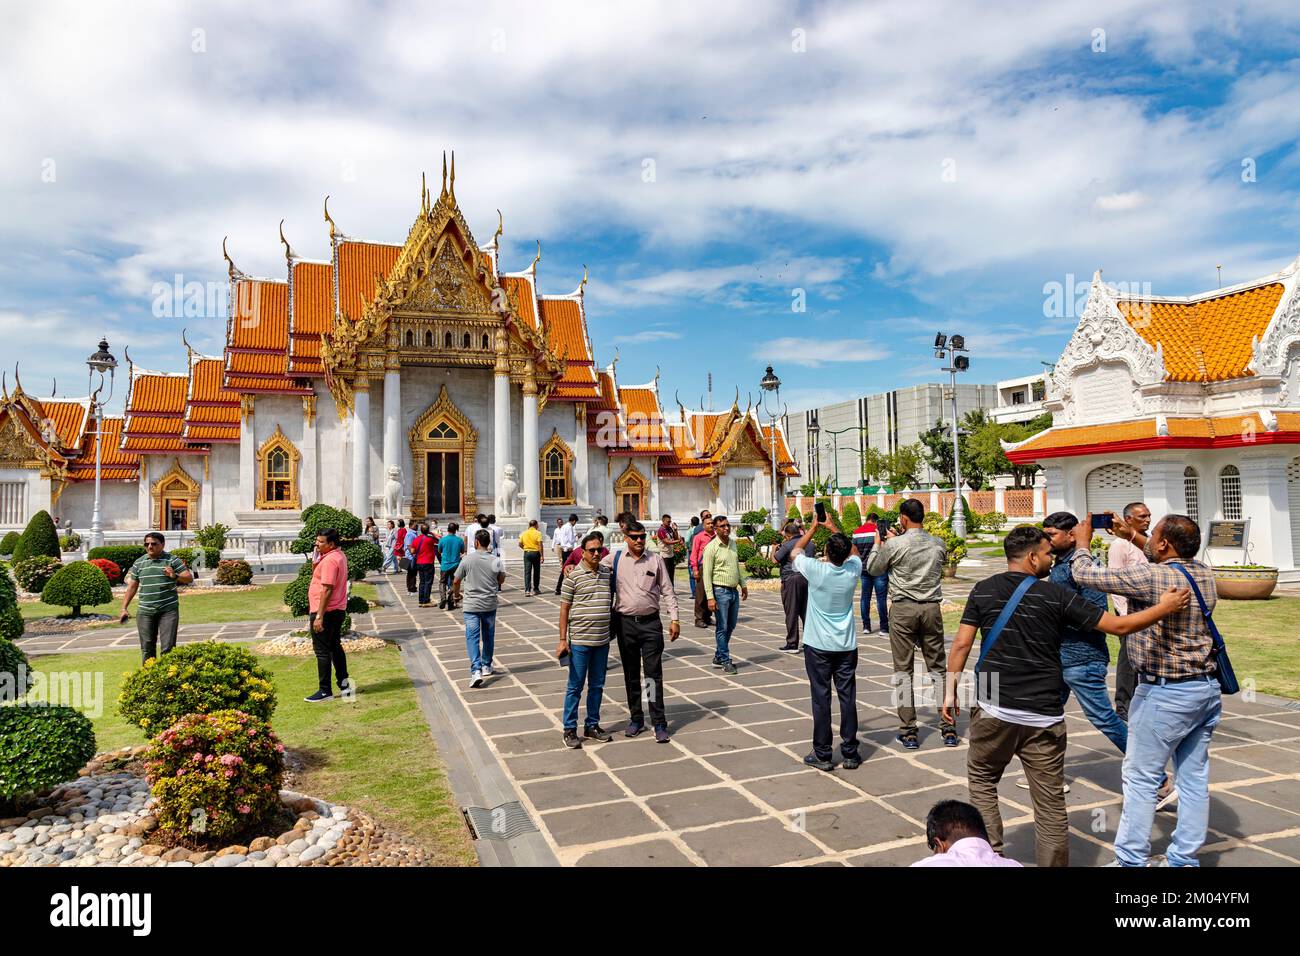 Bangkok, Thailand - Dec 4, 2022: Many tourists visiting Wat Benchamabophit Dusitvanaram (also known as the Marble Temple), a major tourist spot Stock Photo